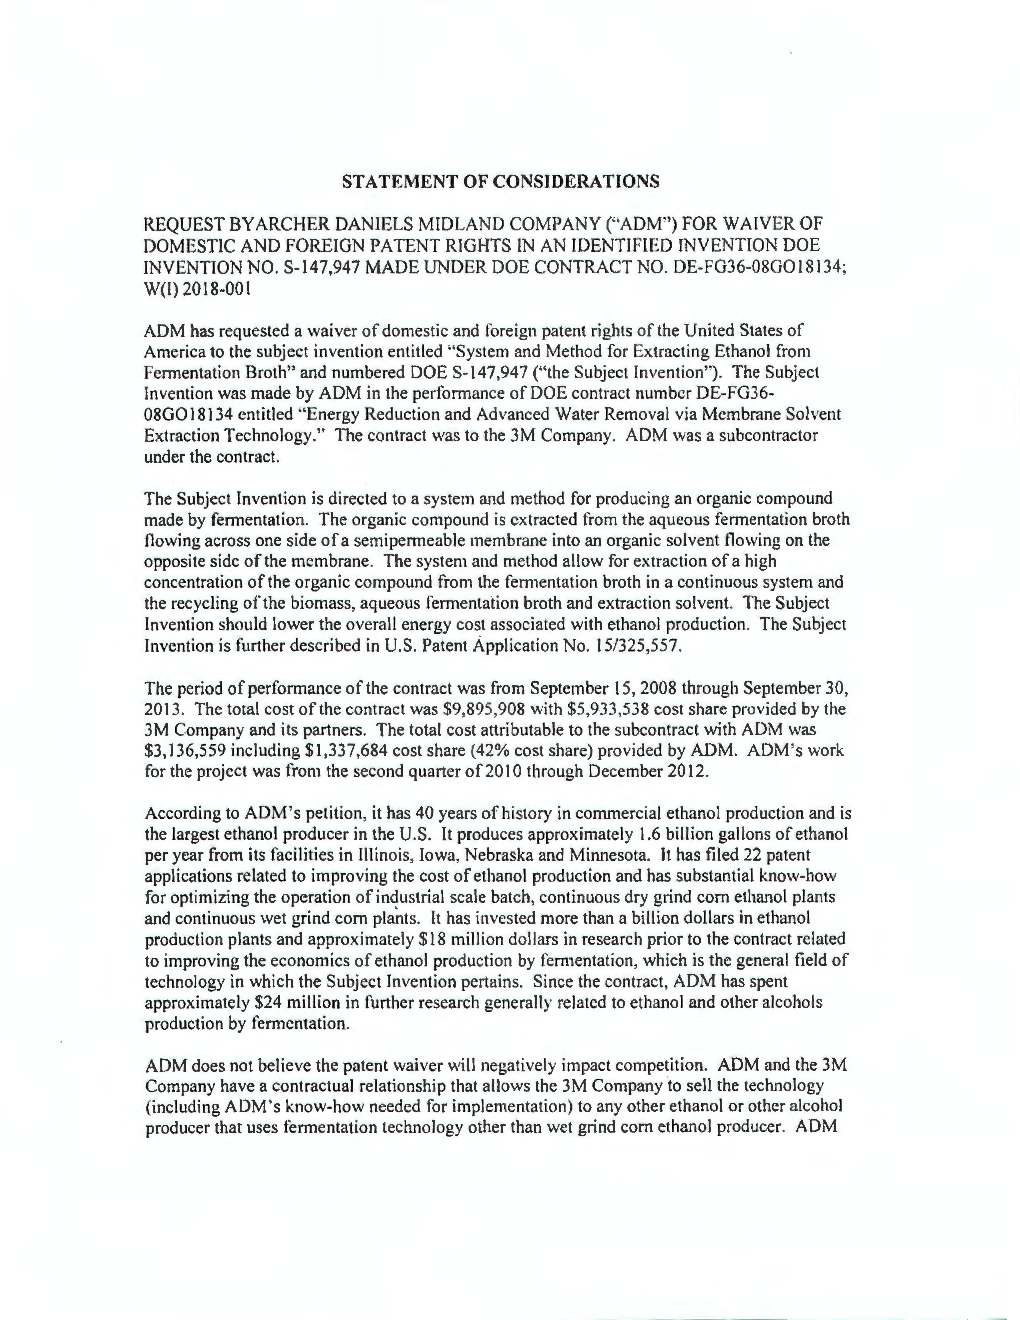 Statement of Considerations Request by Archer Daniels